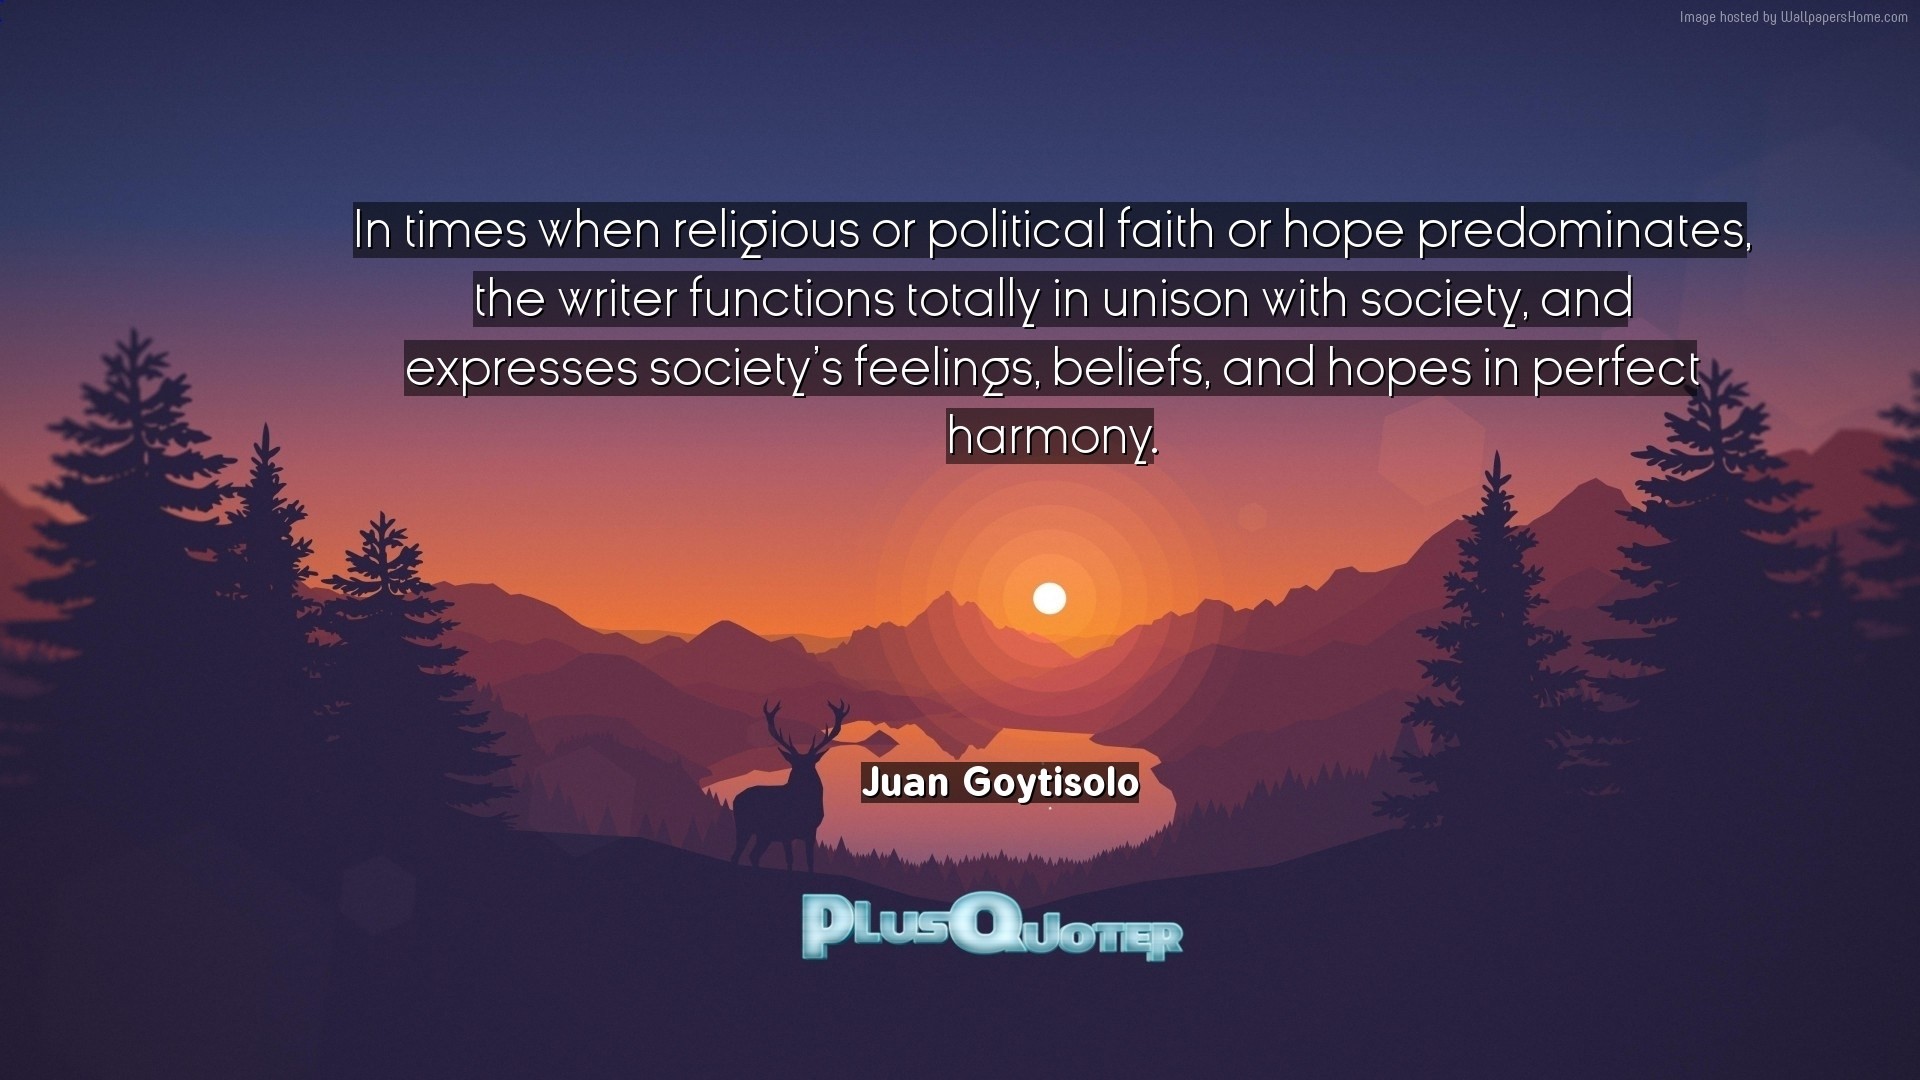 1920x1080 Download Wallpaper with inspirational Quotes- "In times when religious or  political faith or hope